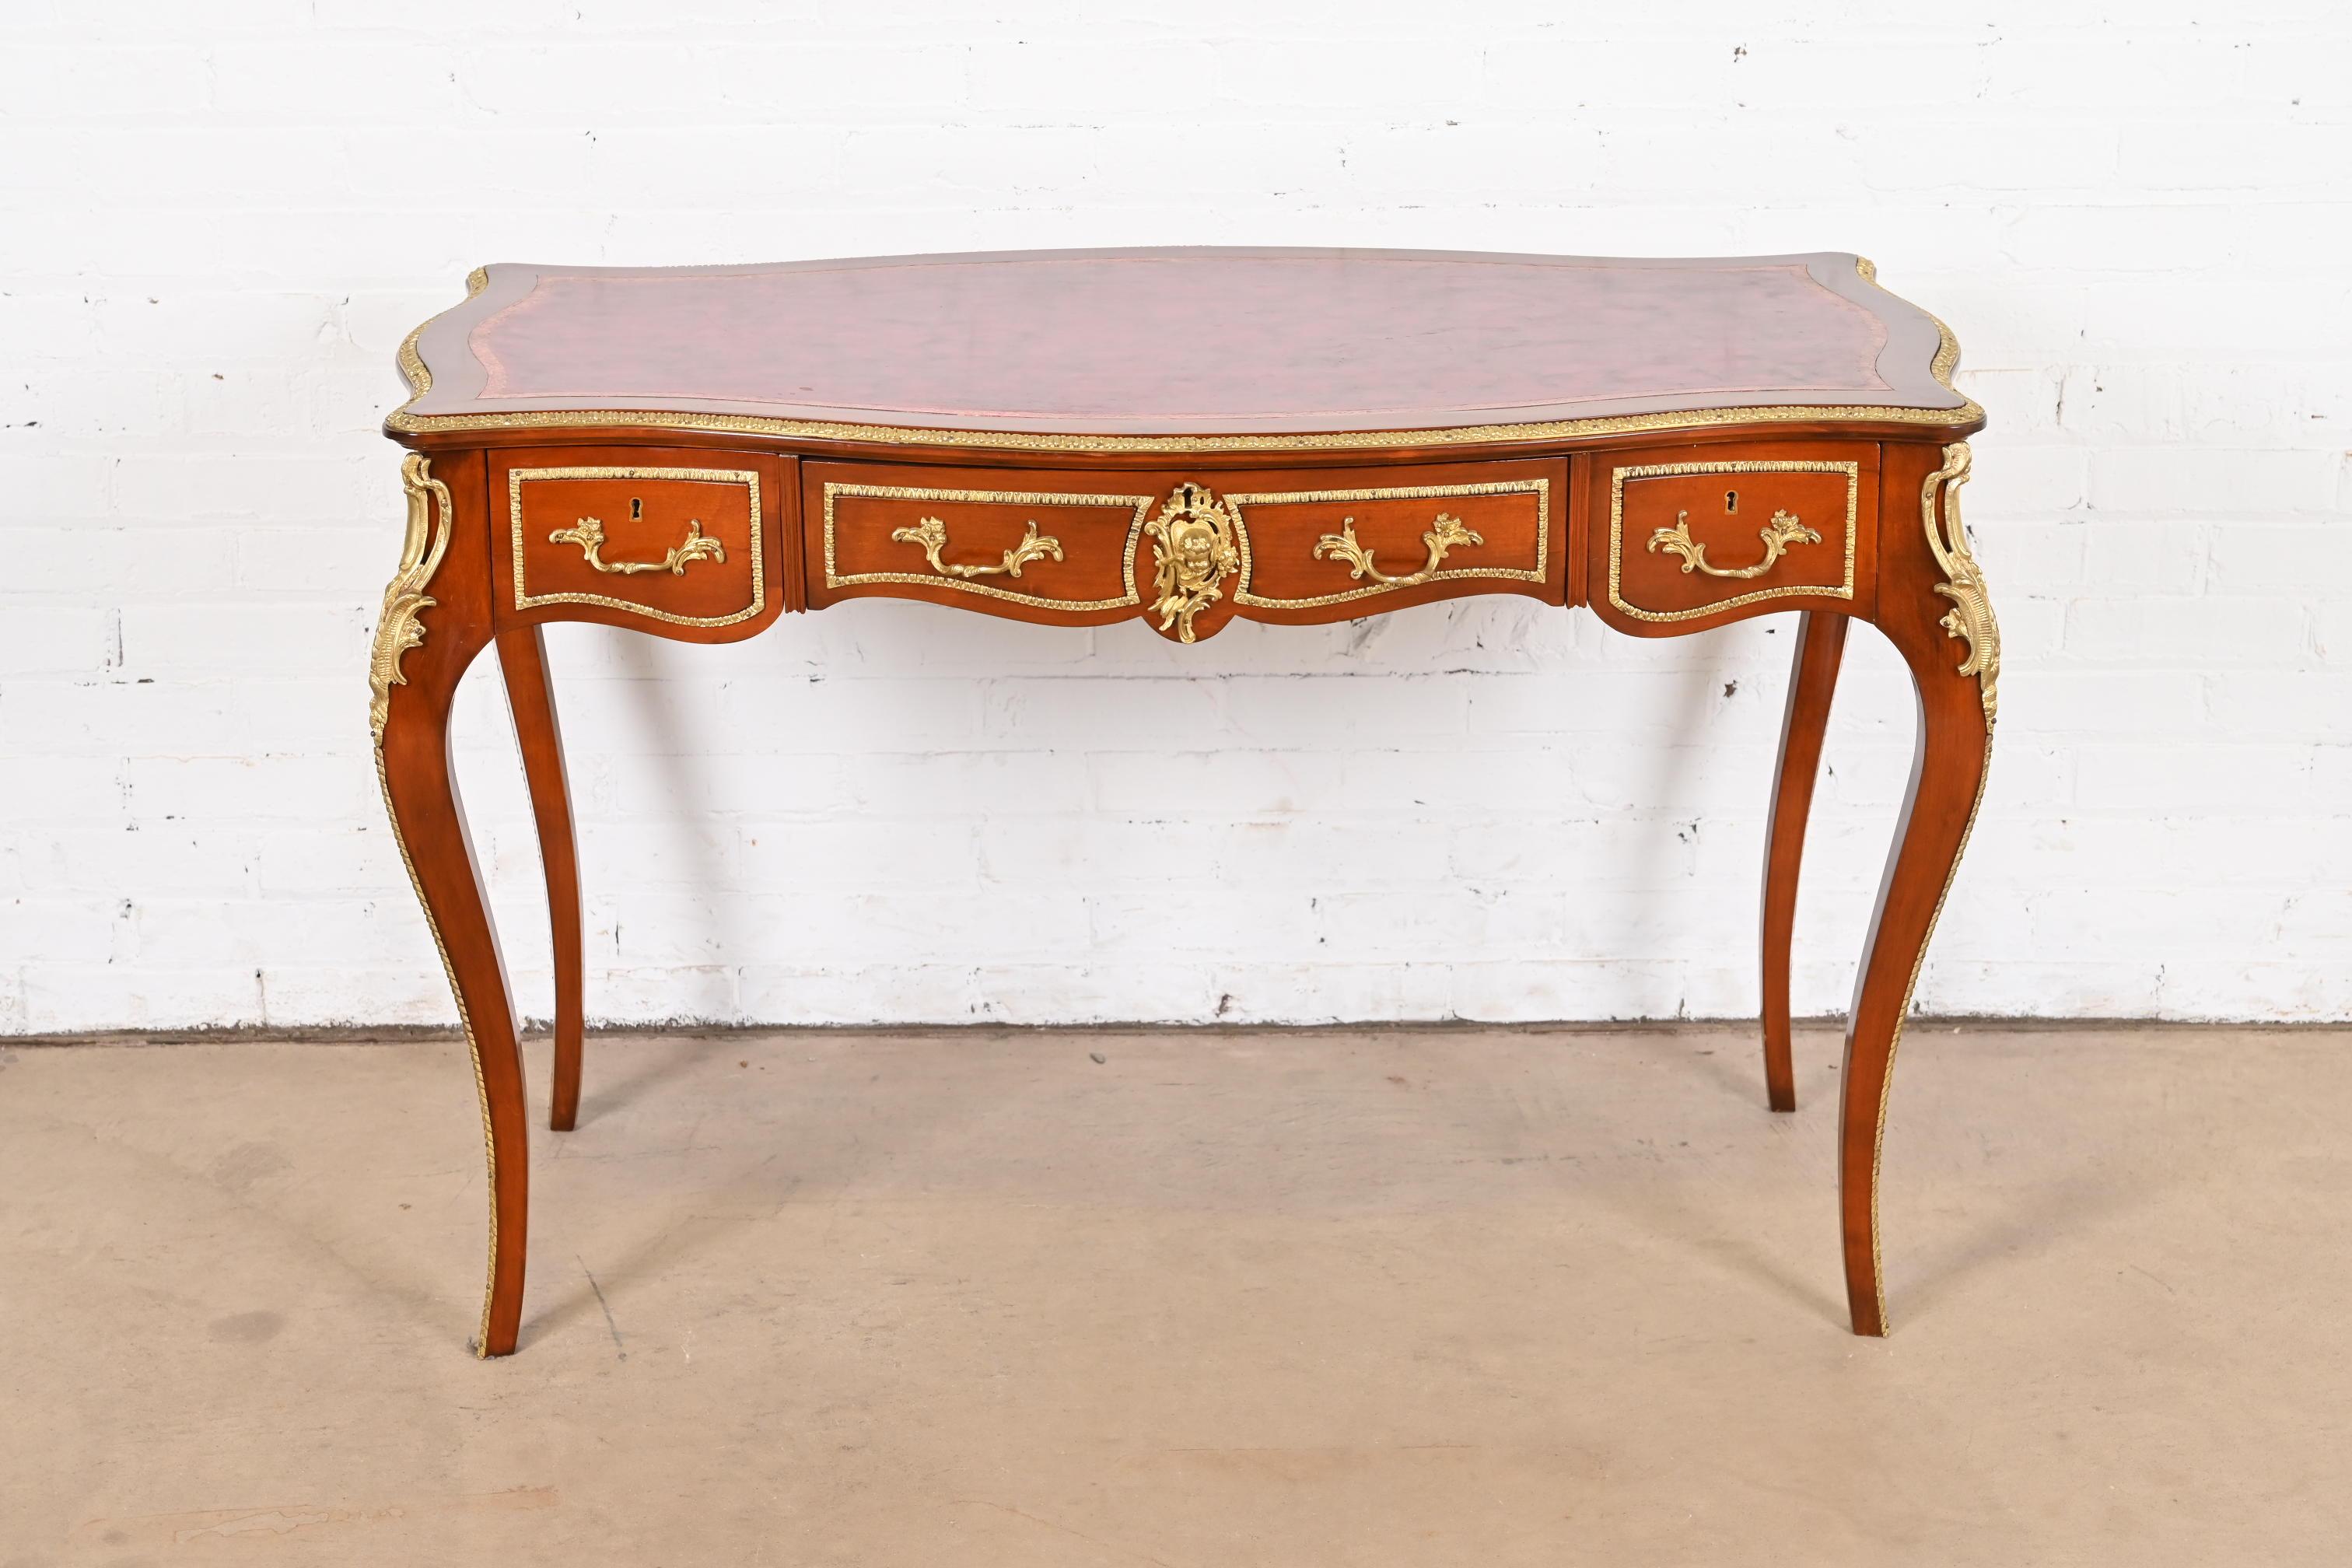 A gorgeous French Louis XV or French Continental style writing desk or bureau plat desk

France, Circa 1940s

Beautiful cherry wood, with red painted faux leather top, and mounted gilt bronze ormolu and hardware.

Measures: 46.5